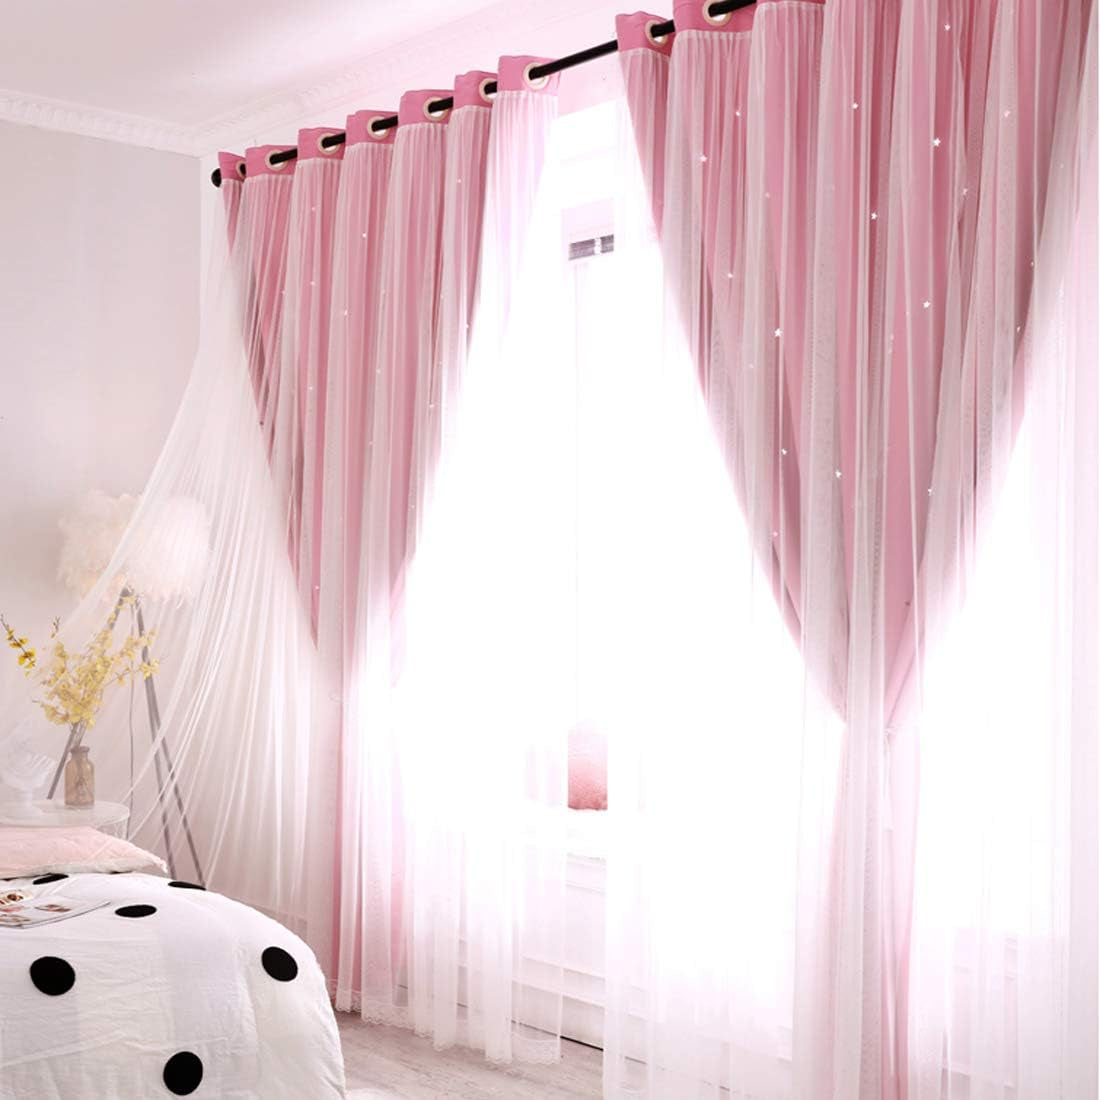 UNISTAR 2 Panels Stars Blackout Curtains for Bedroom Girls Kids Baby Window Decoration Double Layer Star Cut Out Aesthetic Living Room Decor Wall Home Curtain,W52 X L63 Inches,Pink  UNISTAR   